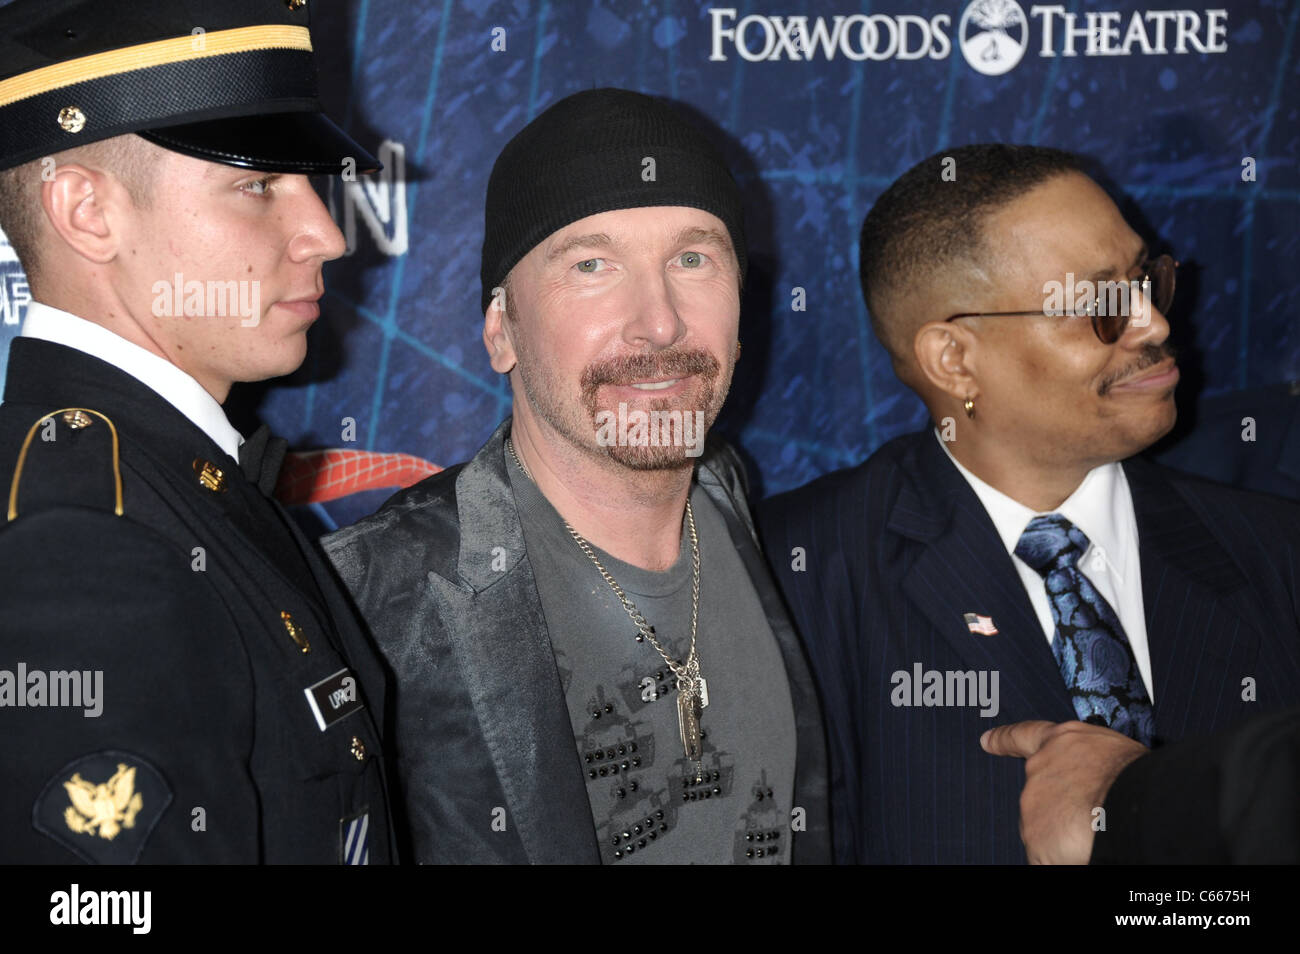 Edge in attendance for Spider-Man: Turn Off The Dark Opening Night on Broadway, The Foxwoods Theatre, New York, NY June 14, 2011. Photo By: Rob Rich/Everett Collection Stock Photo